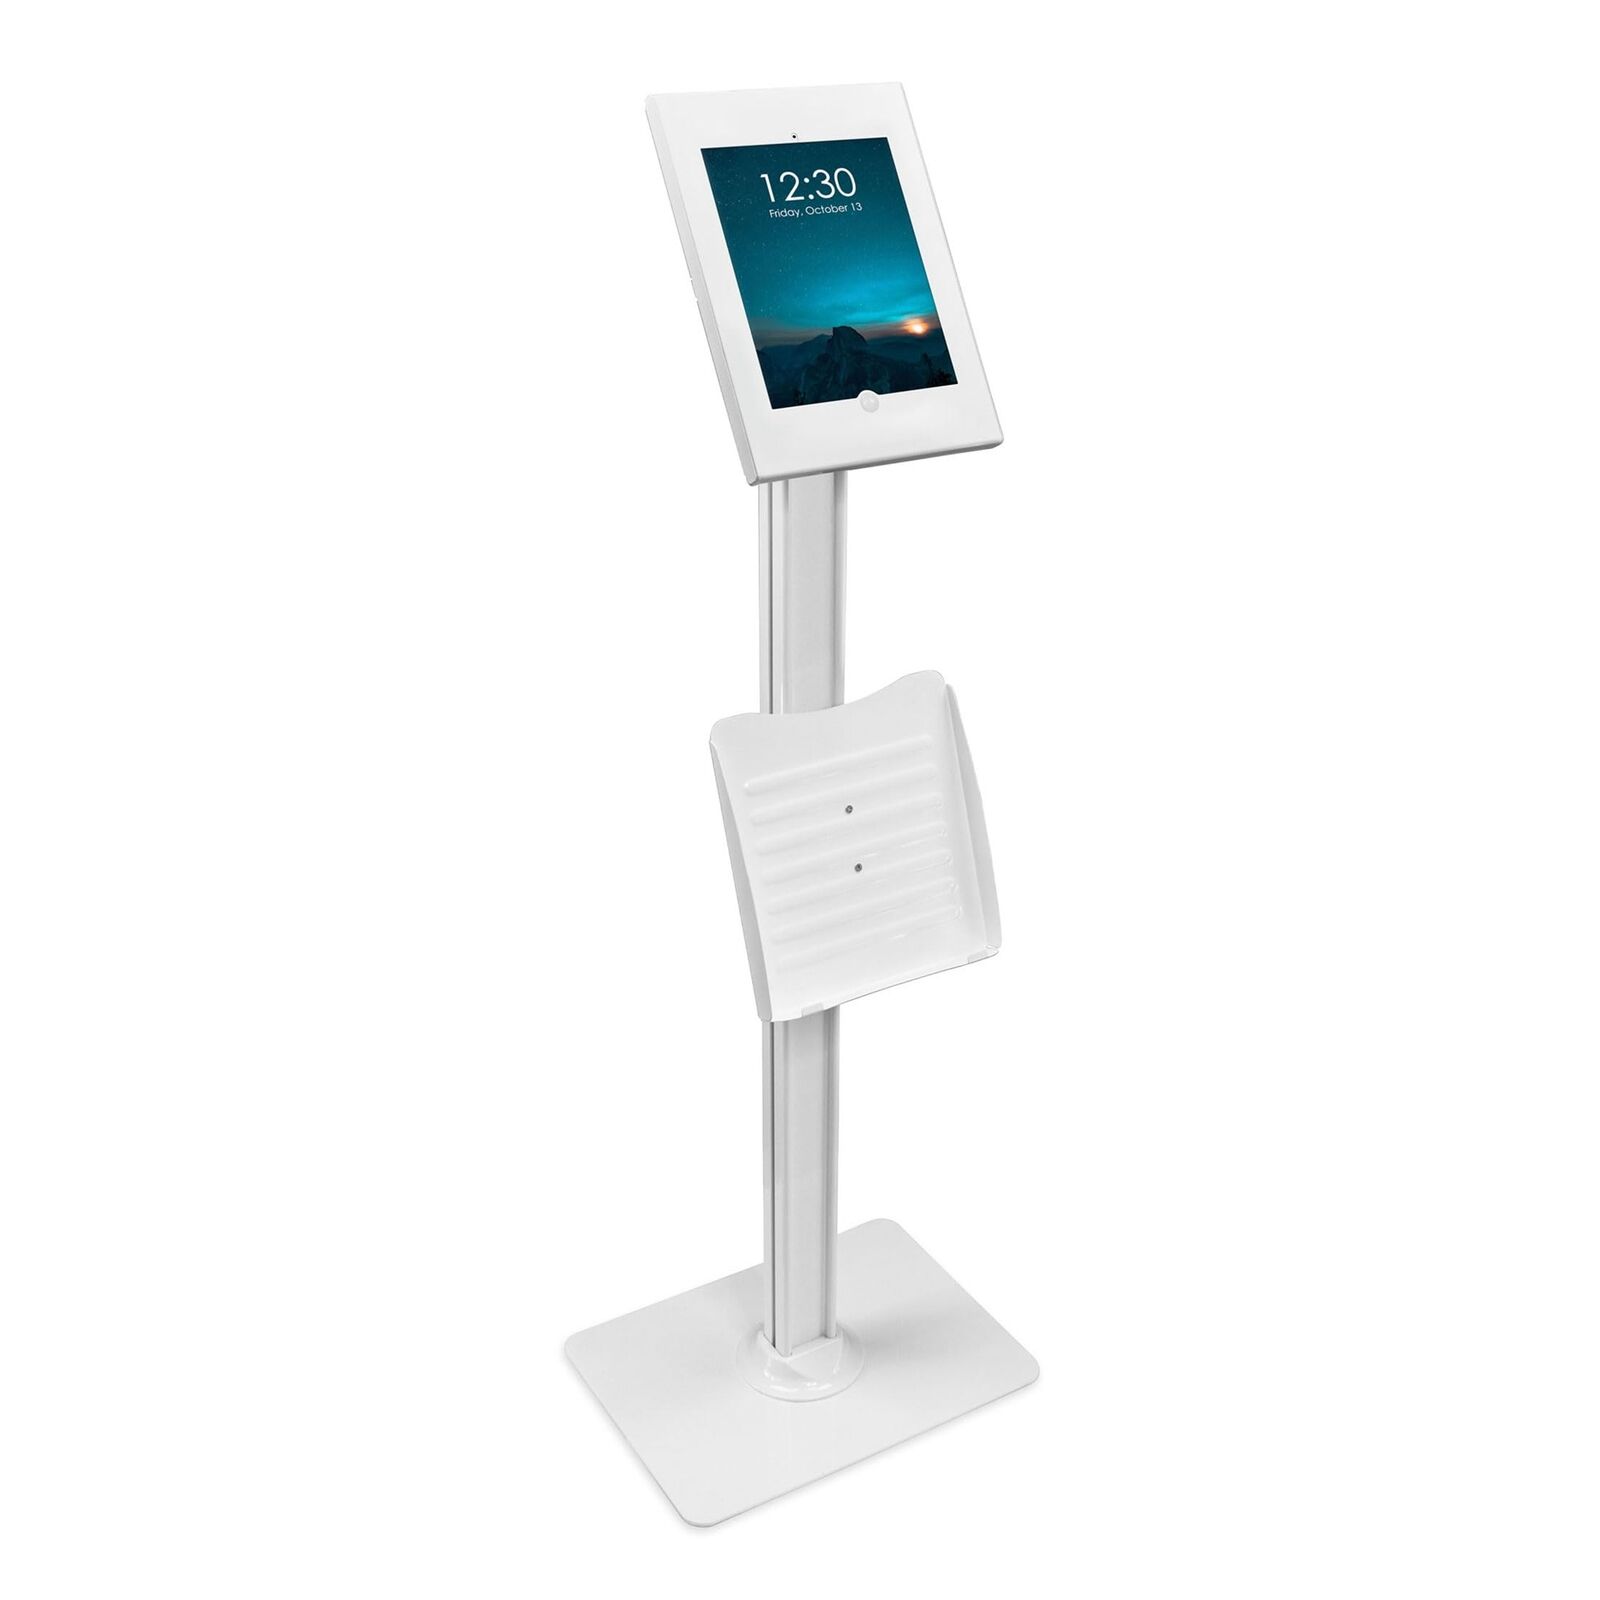 Mount-It Anti-Theft Floor Stand Compatible with iPad, Contact-Less Kiosk wit...